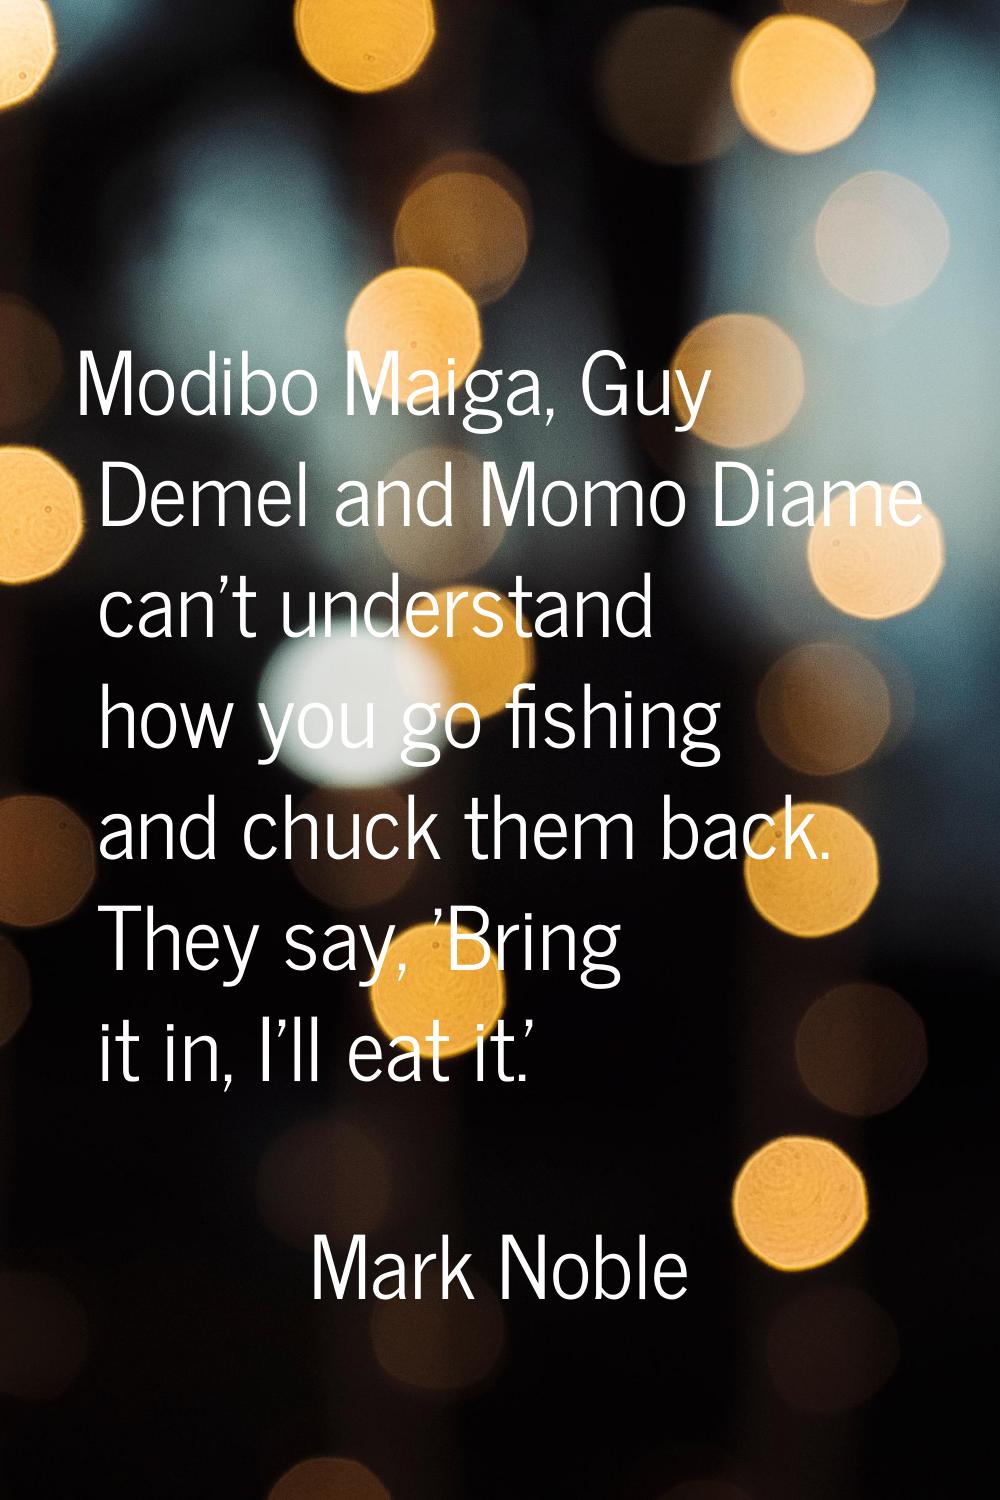 Modibo Maiga, Guy Demel and Momo Diame can't understand how you go fishing and chuck them back. The